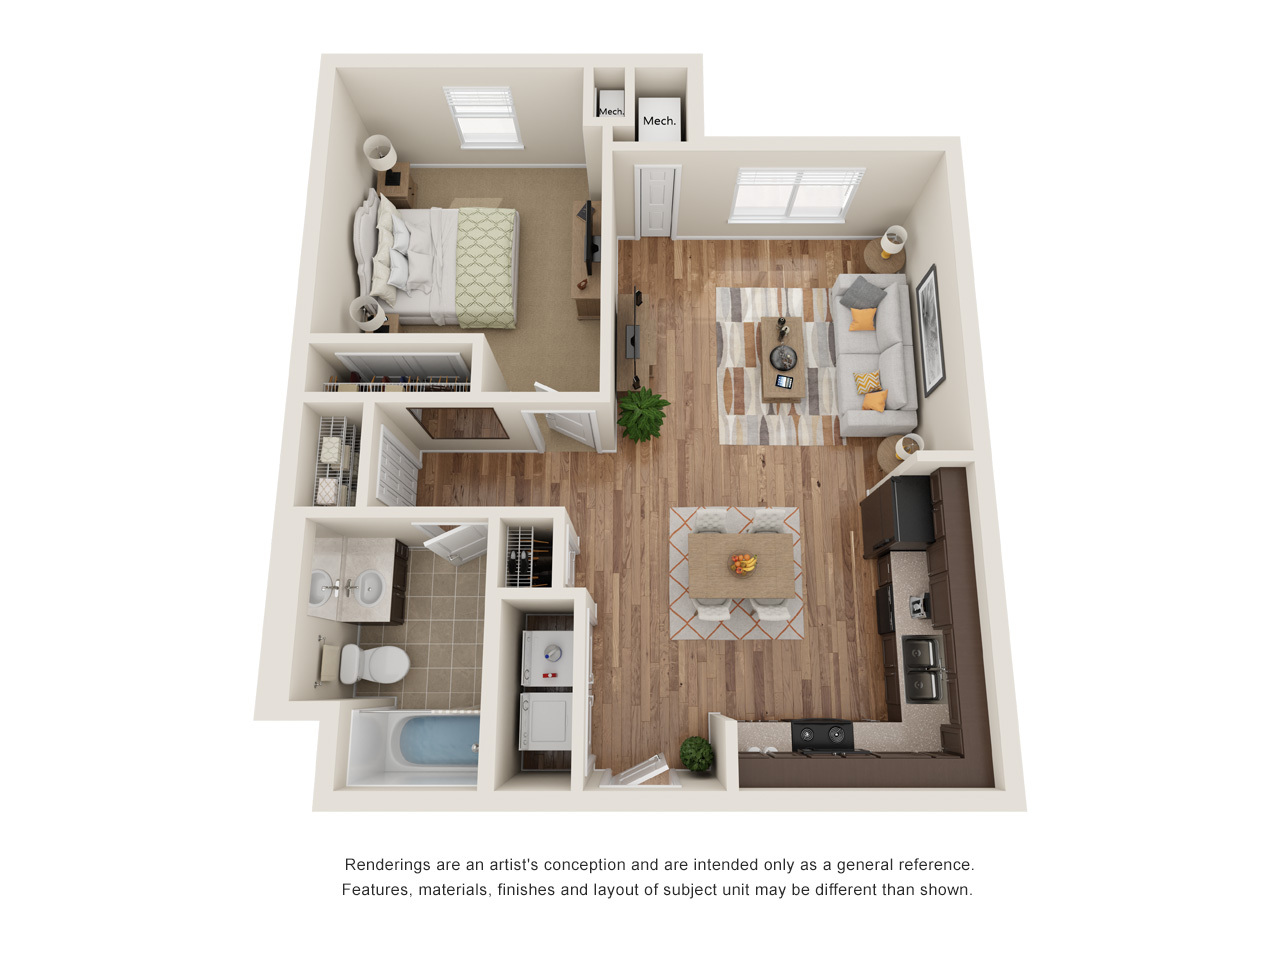 1-bedroom floor plan rendering of a Manor, TX apartment at the Commons at Manor